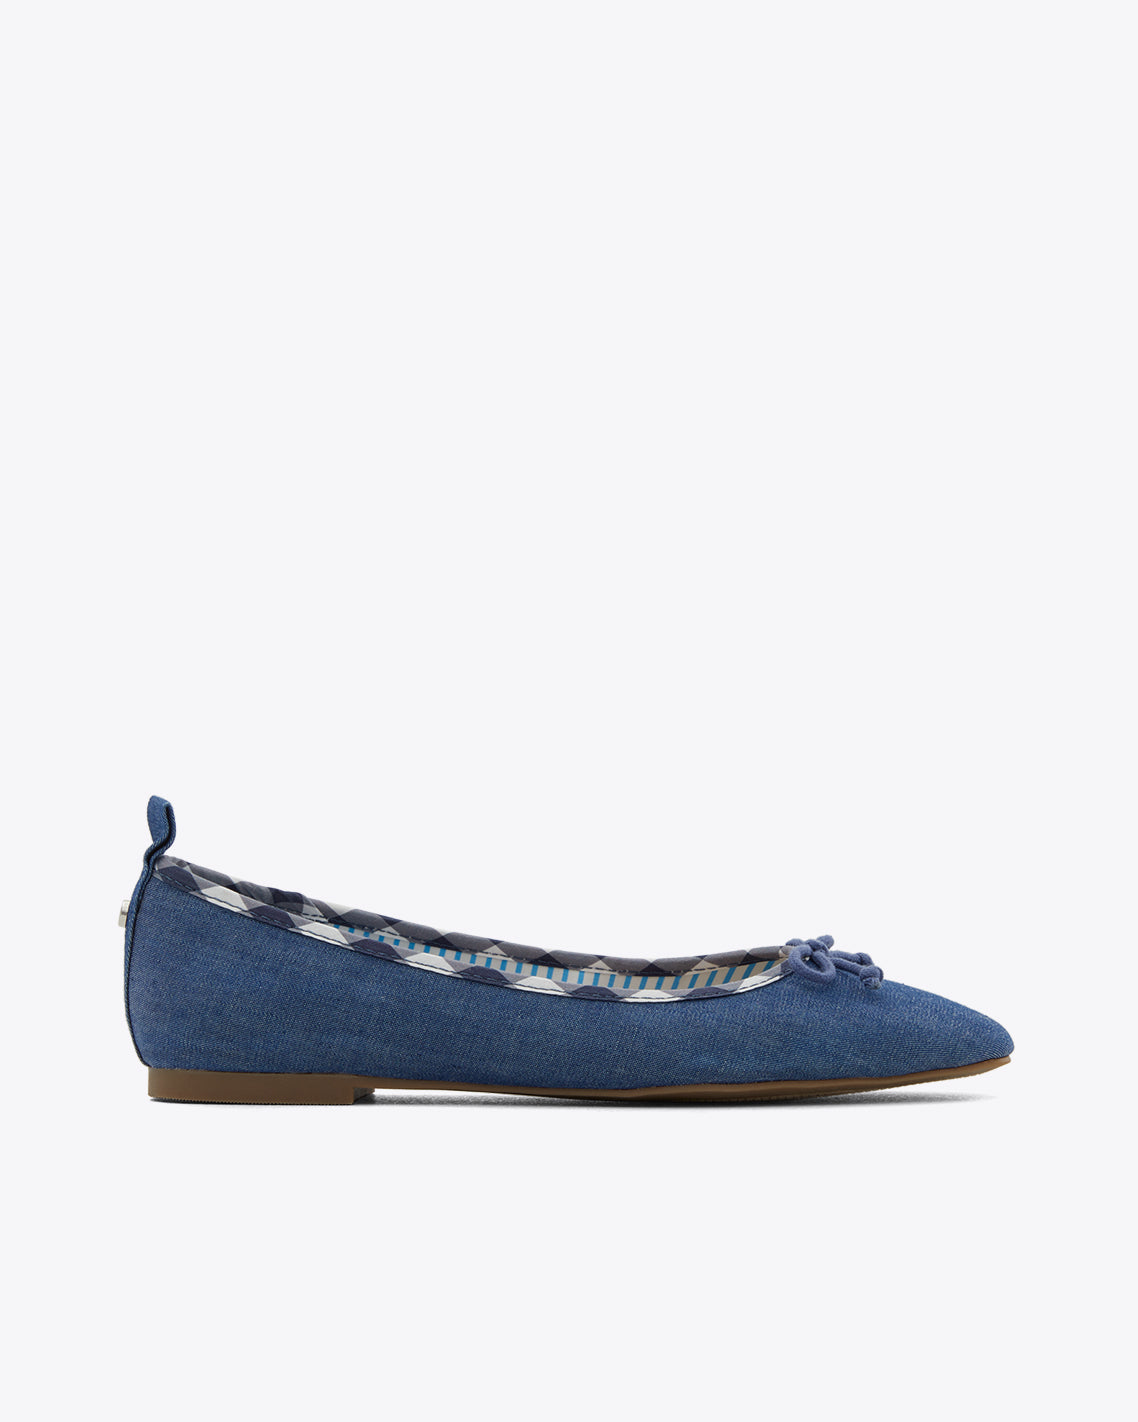 Taylor Ballet Flats in Chambray